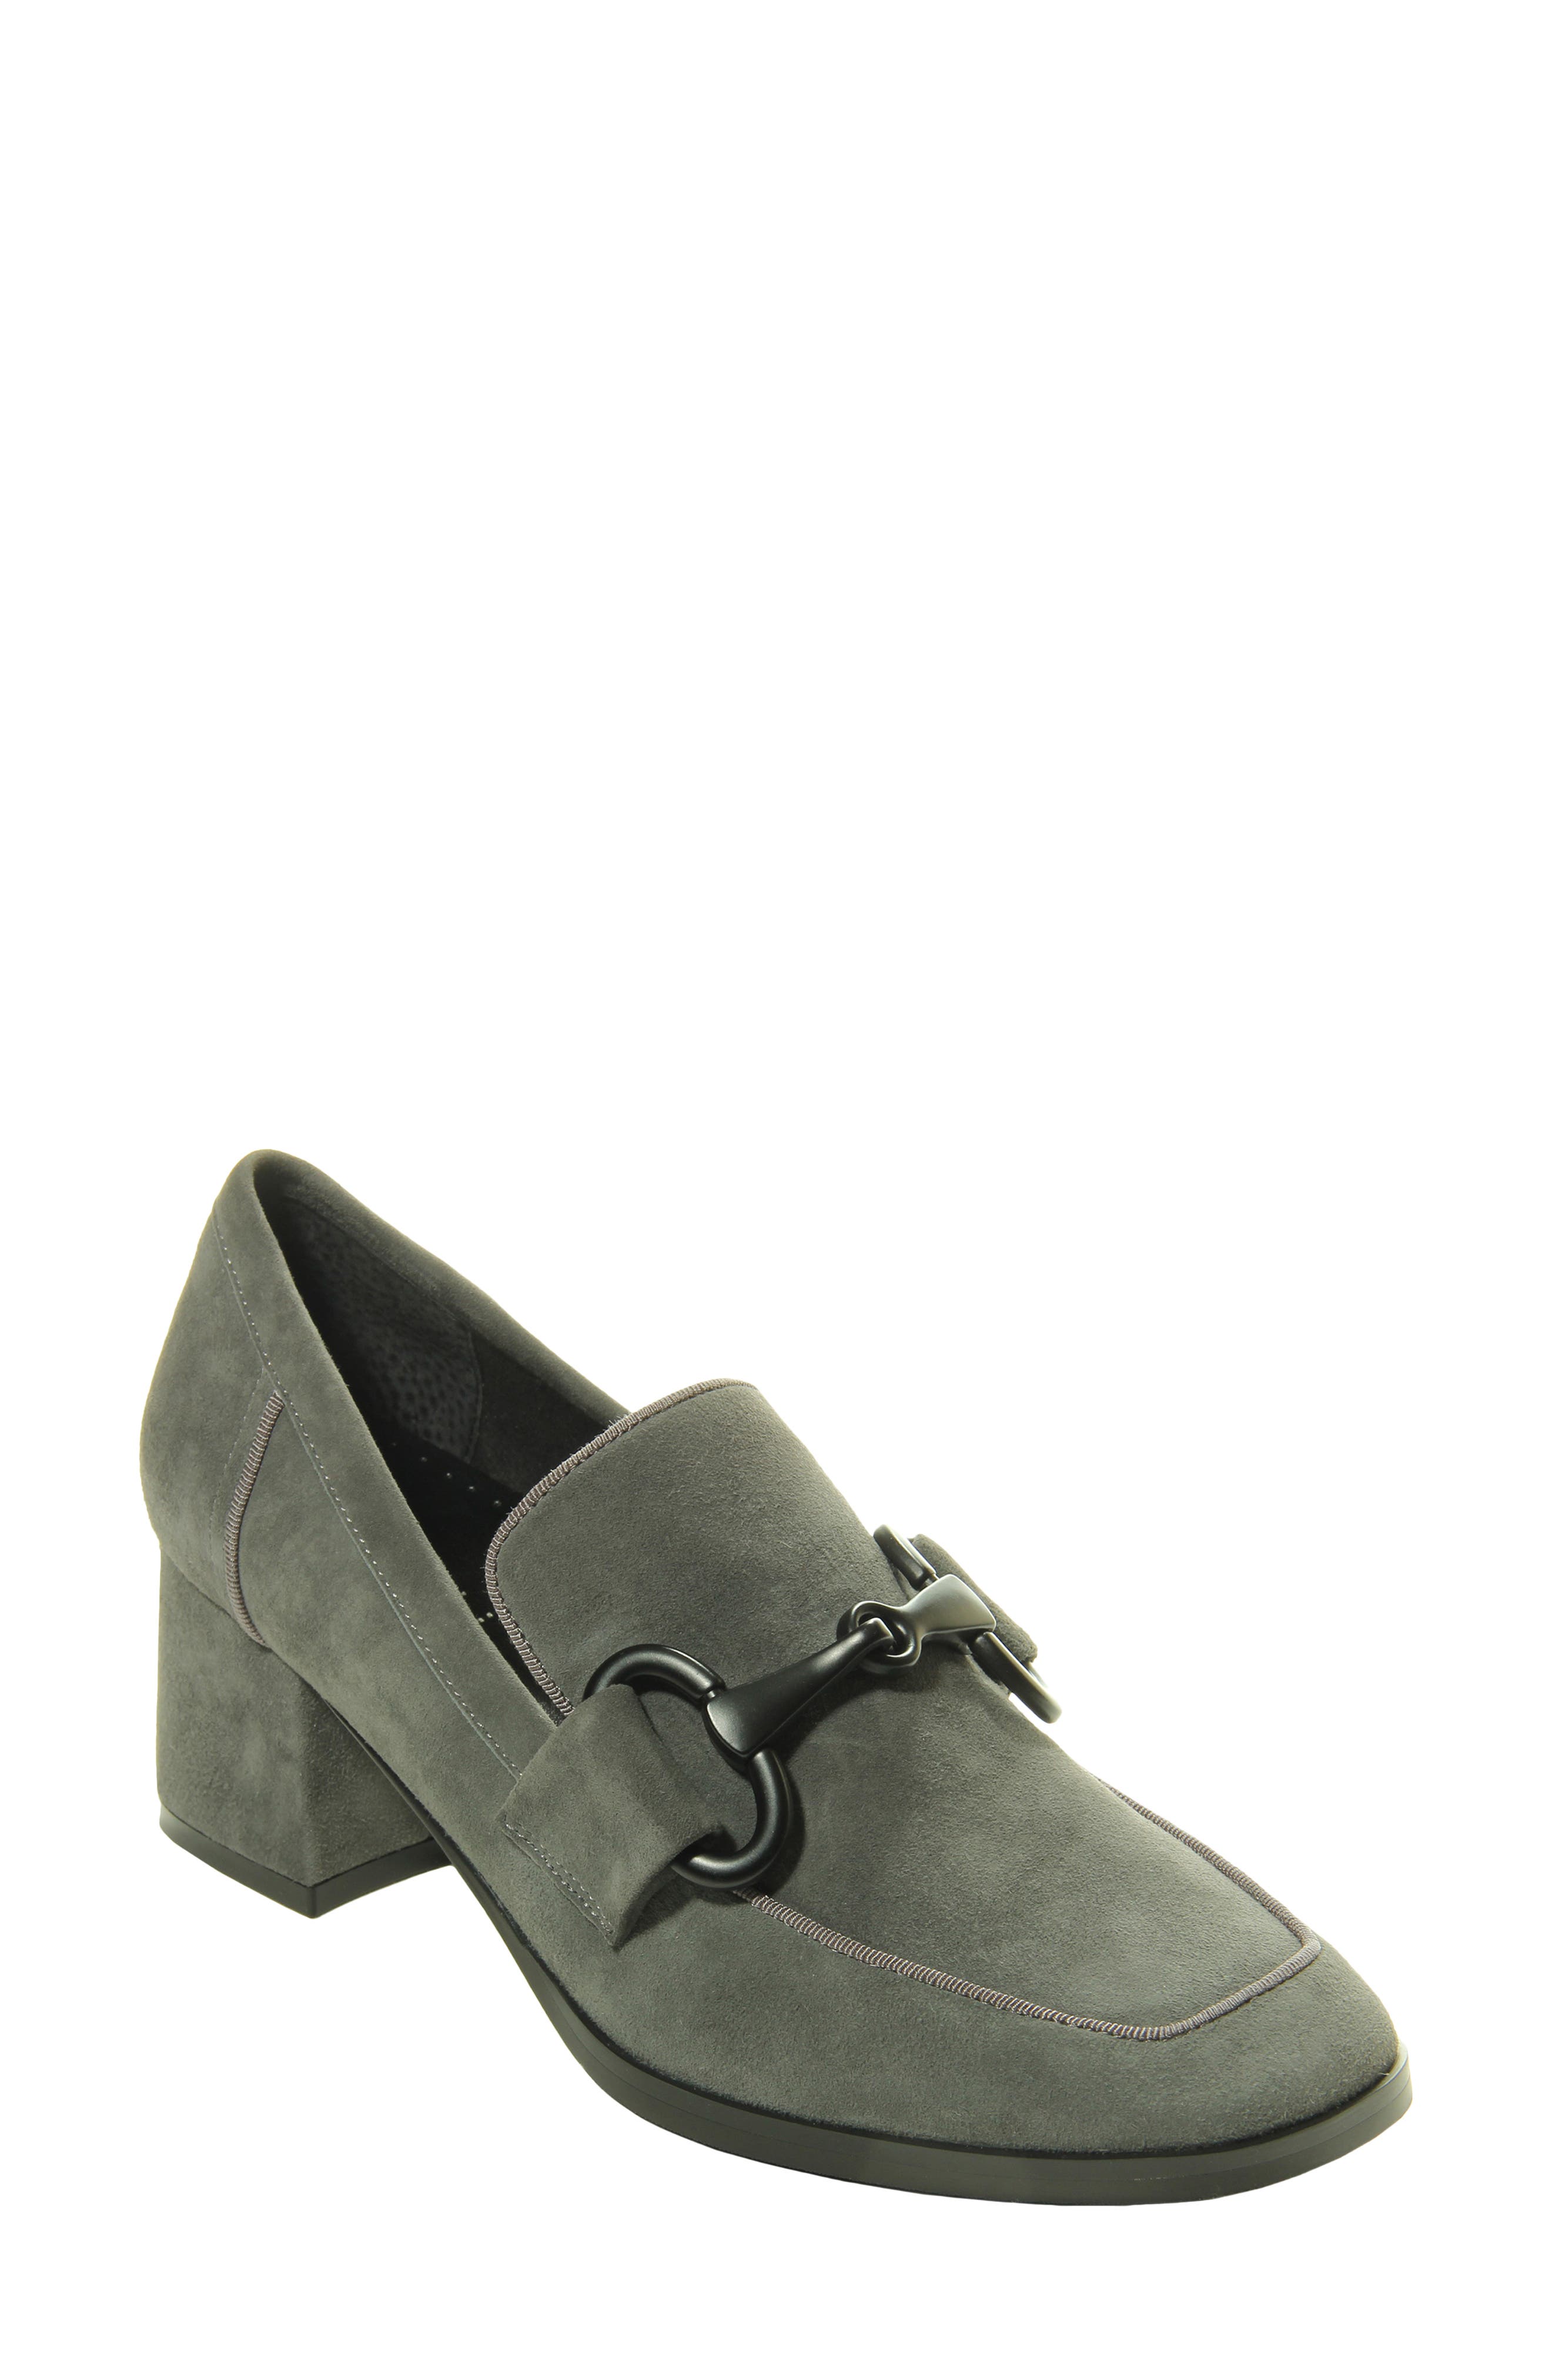 Women's Grey Shoes New Arrivals: Boots 